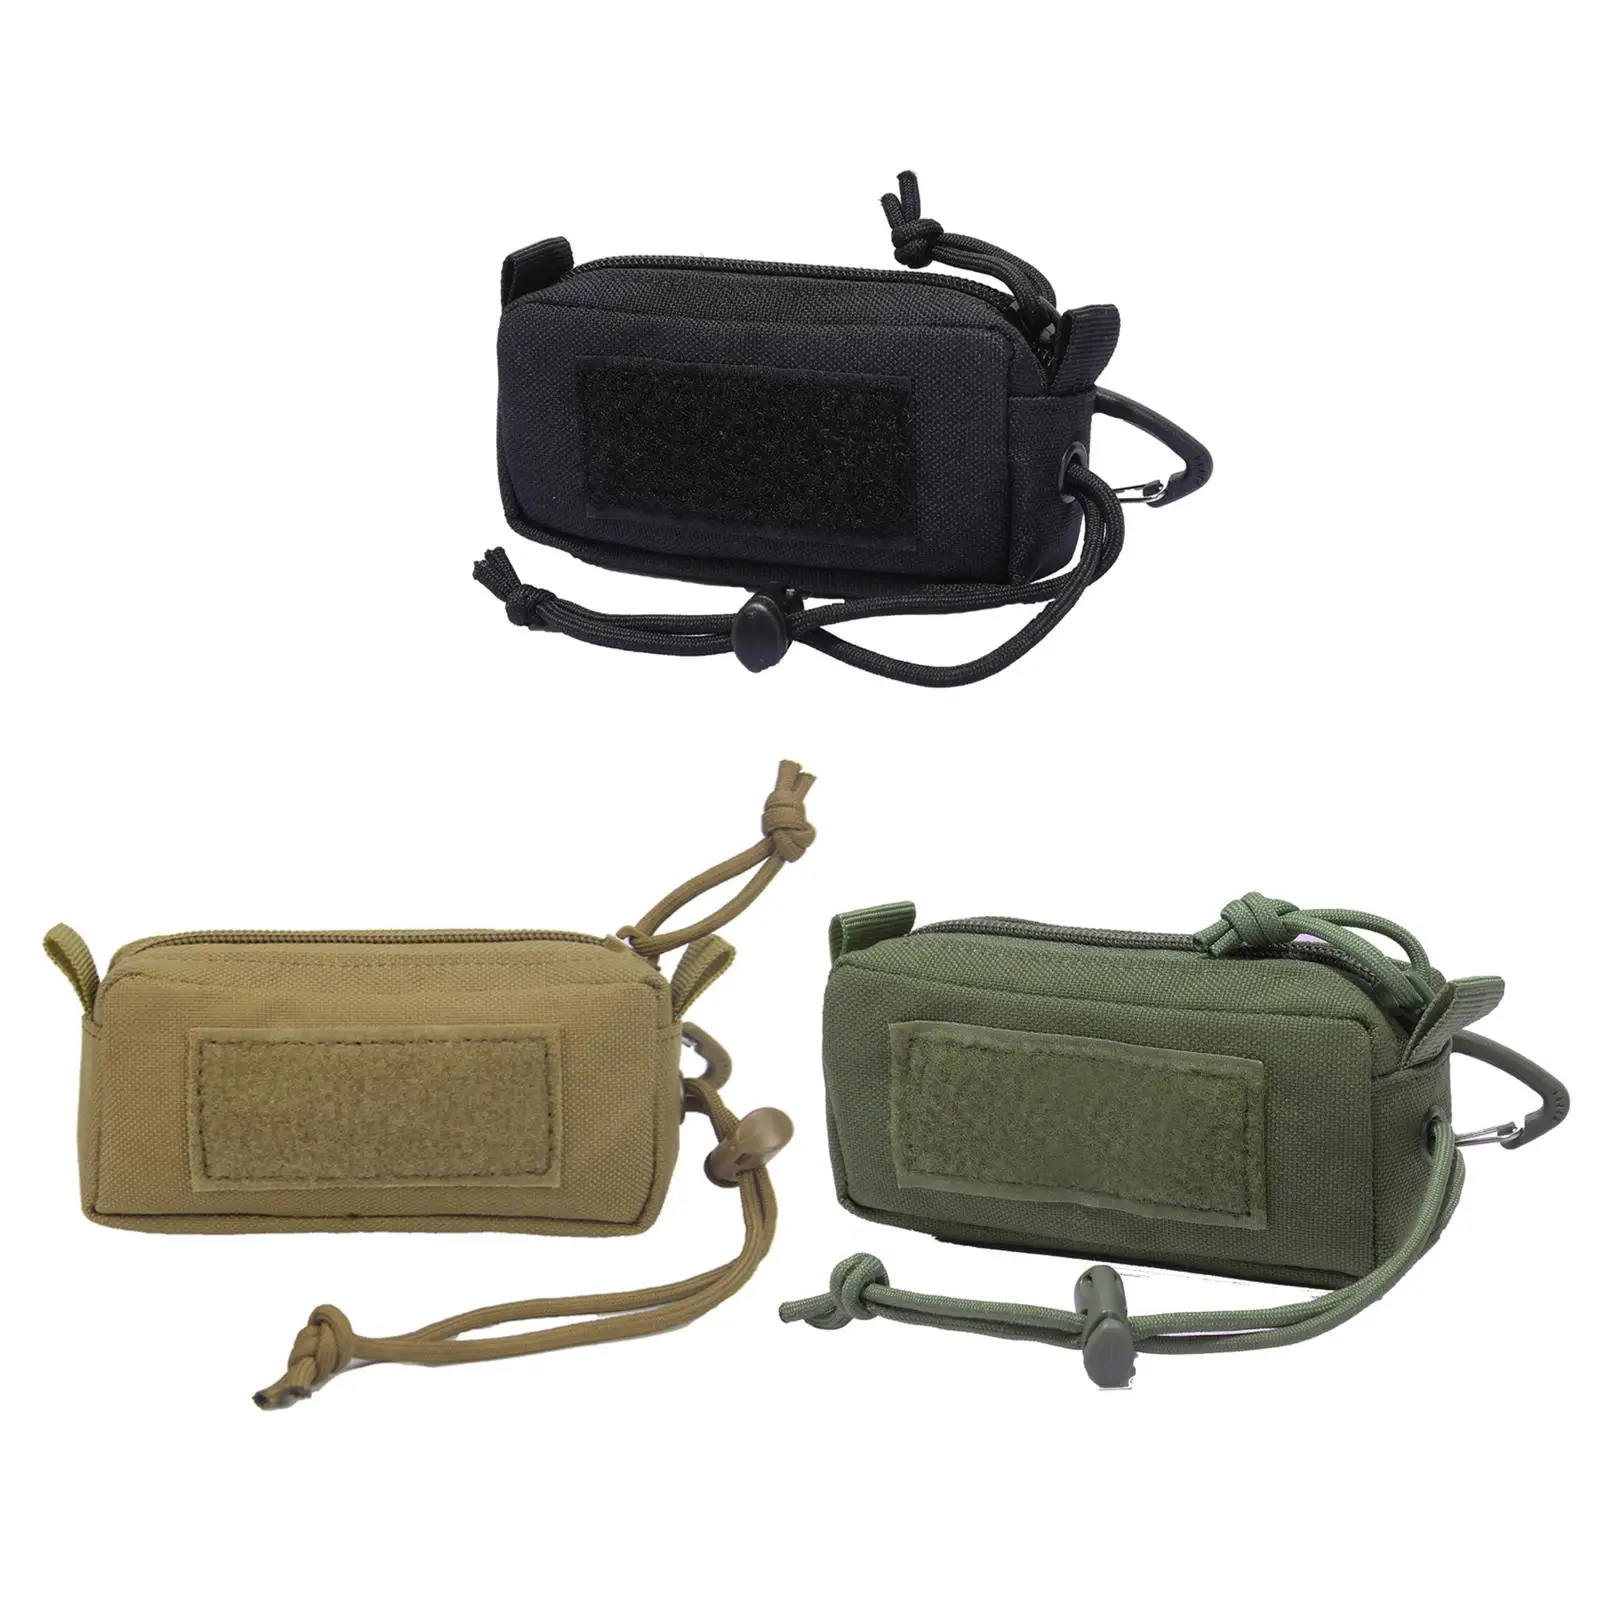 Portable Waist Bag Pack Zipper Closure 1000D Nylon Multi-Purpose with Key Ring Key Holder for Phone Credit Cards Hunting Coins